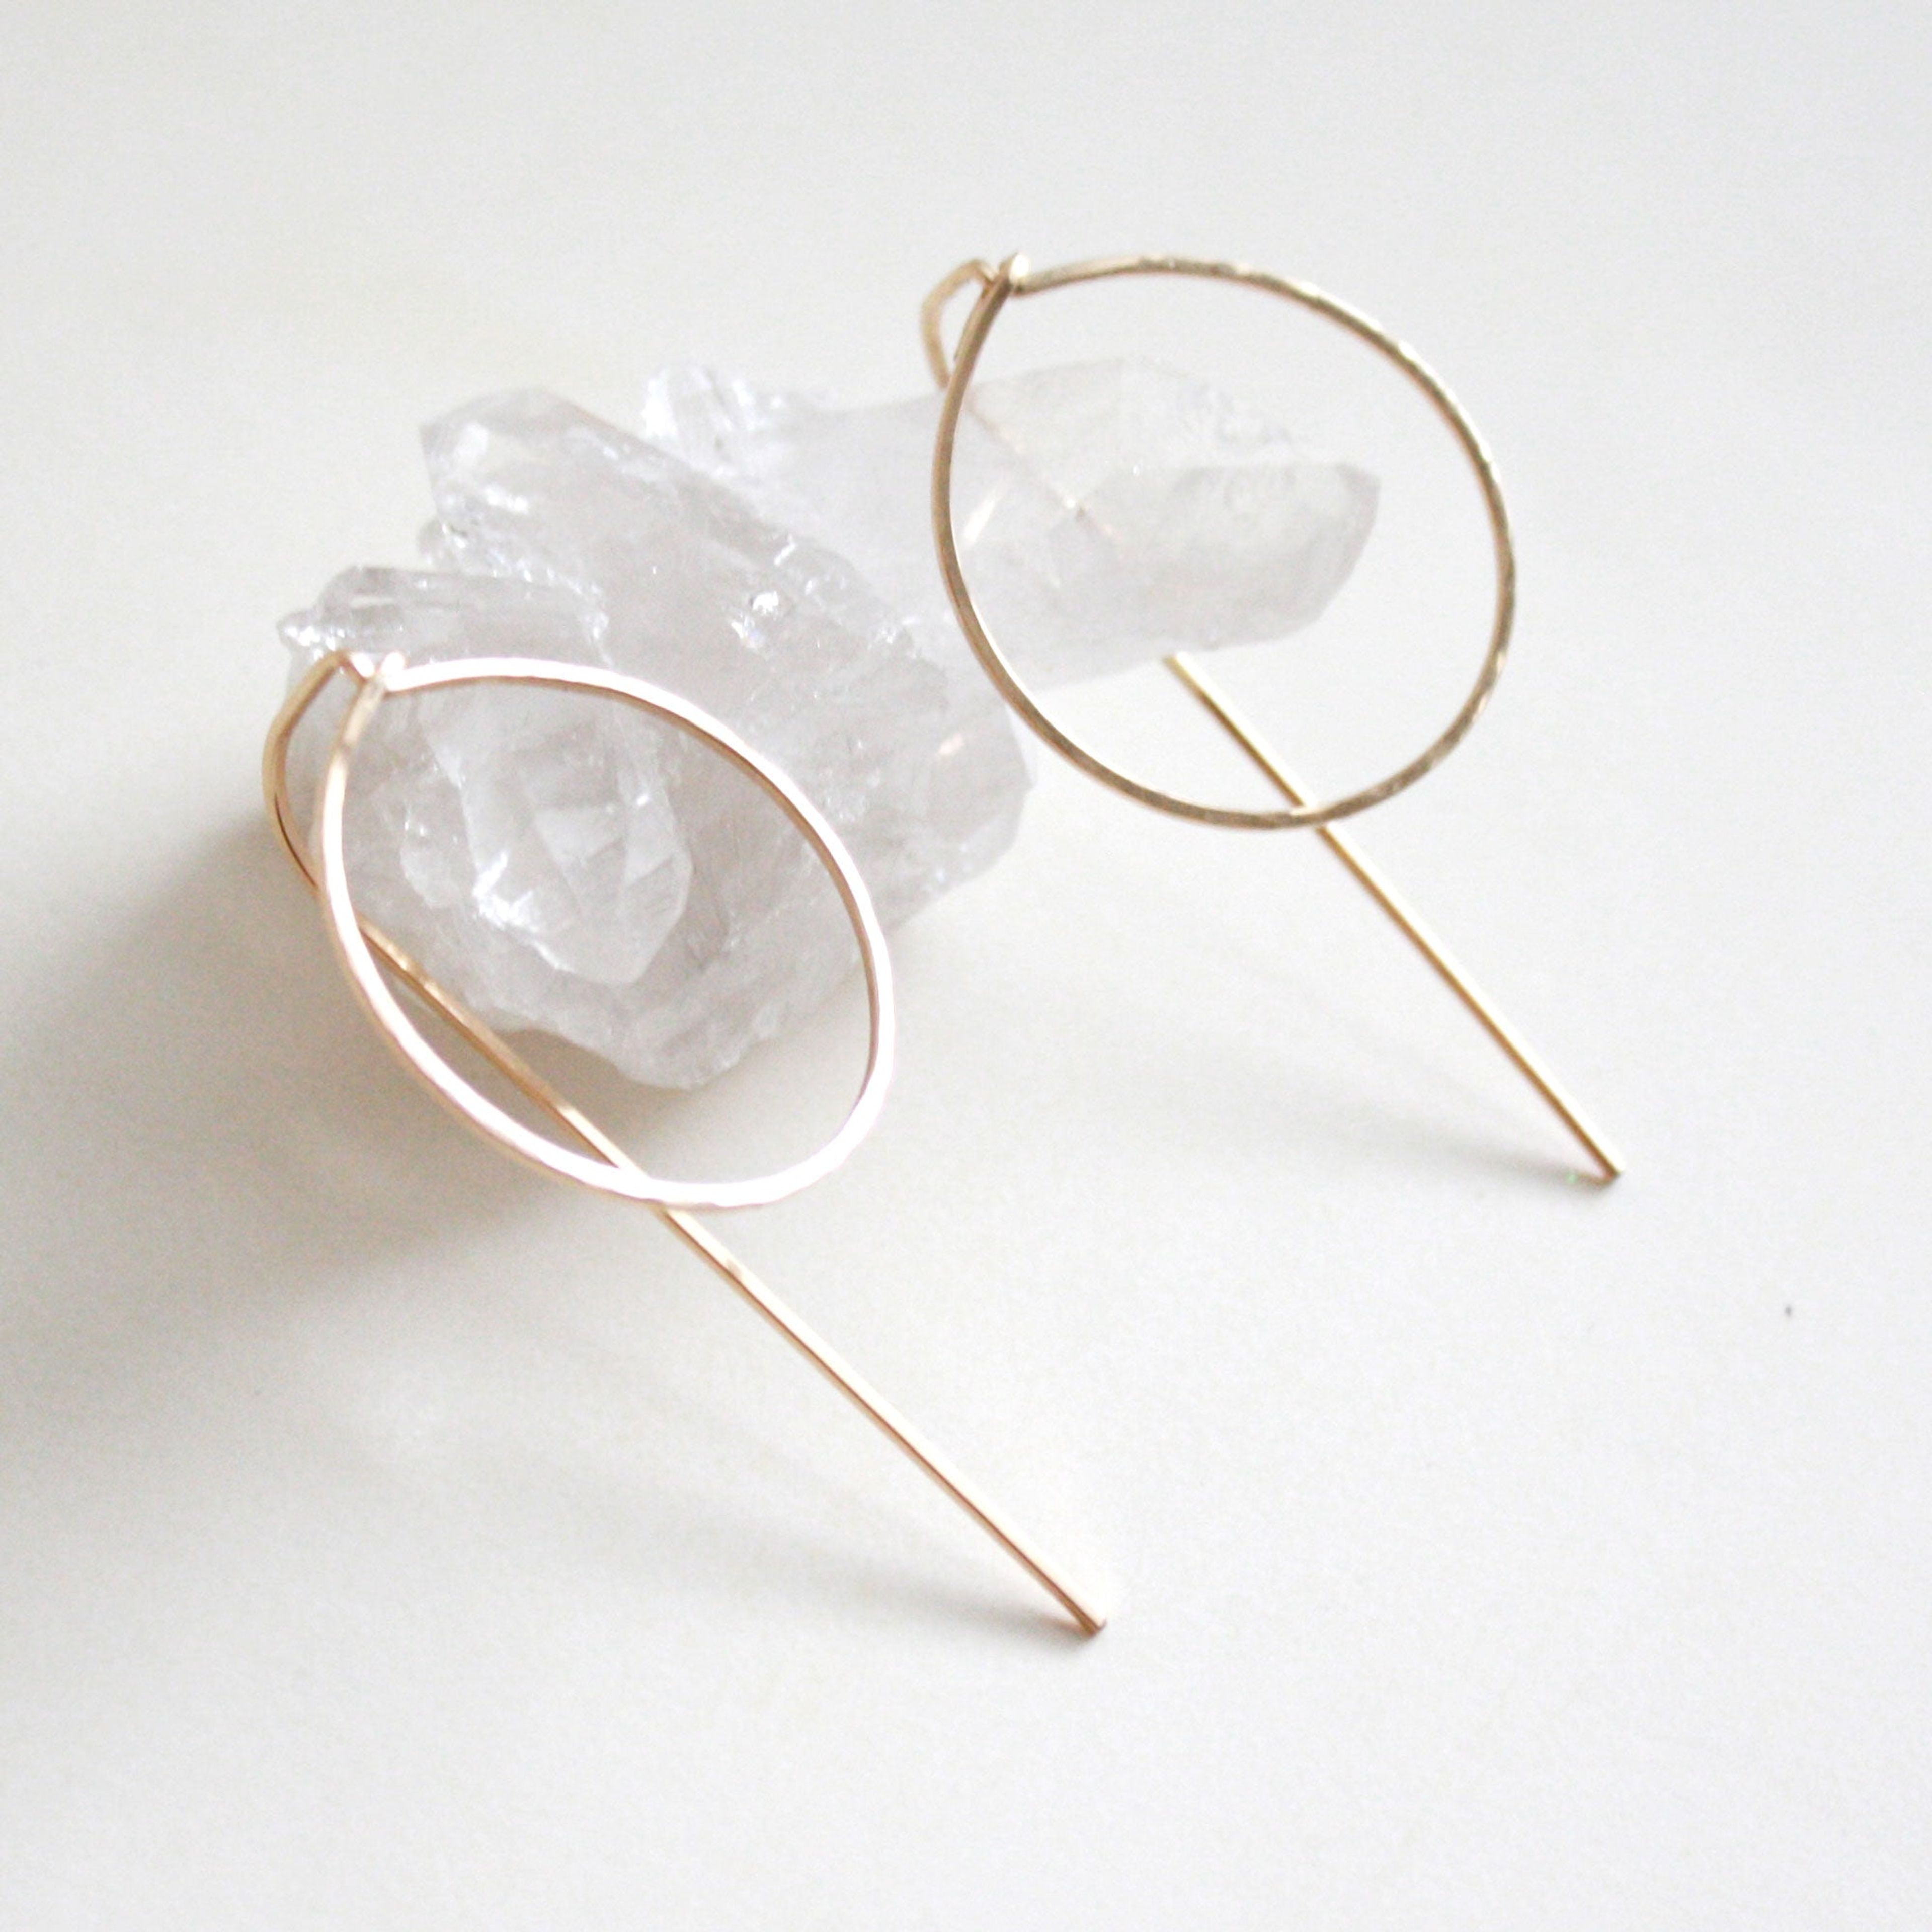 Hammered Circle Threader Earrings - Large